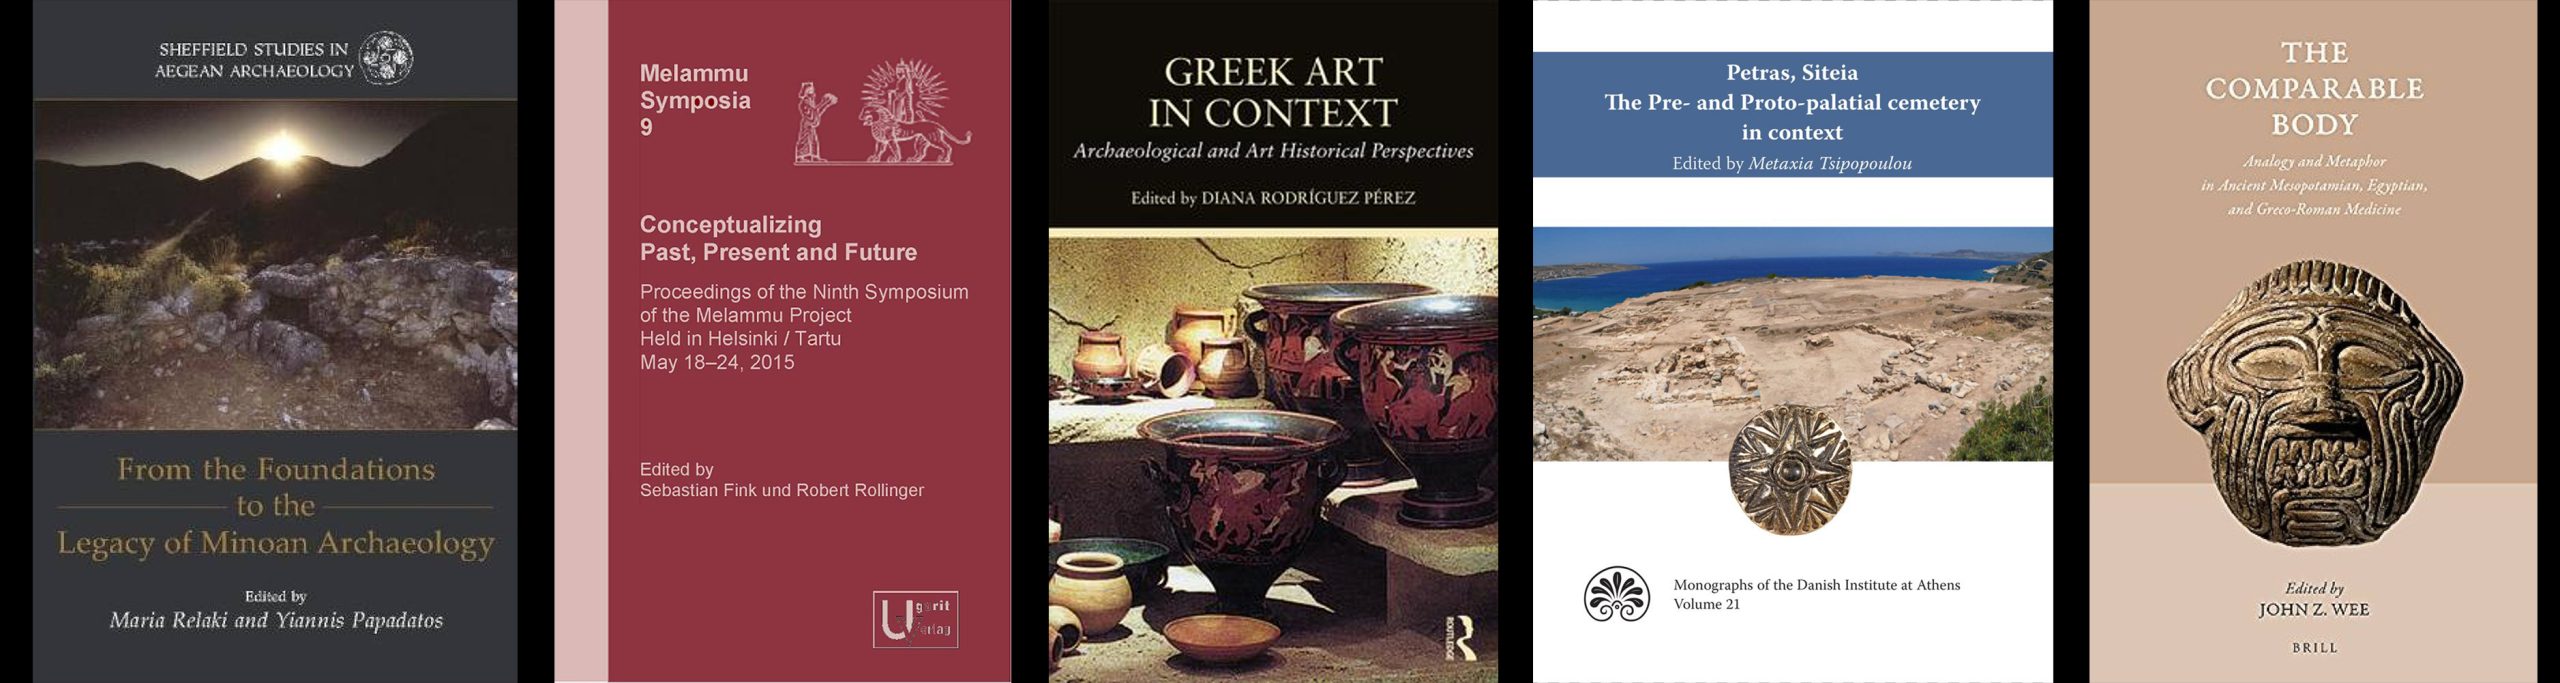 1. From the Foundations to the Legacy of Minoan Archaeology. 2. Conceptualizing Past, Present and Future: Proceedings of the Ninth Symposium of the Melammu Project Held in Helsinki/Tartu May 18-24, 2015. 3. Greek Art in Context: Archaeological and Art Historical Perspectives. 4. Petras, Siteia: The Pre- and Proto-palatial cemetery in context. 5. The Comparable Body: Analogy and Metaphor in Ancient Mesopotamian, Egyptian, and Grec-Roman Medicines.